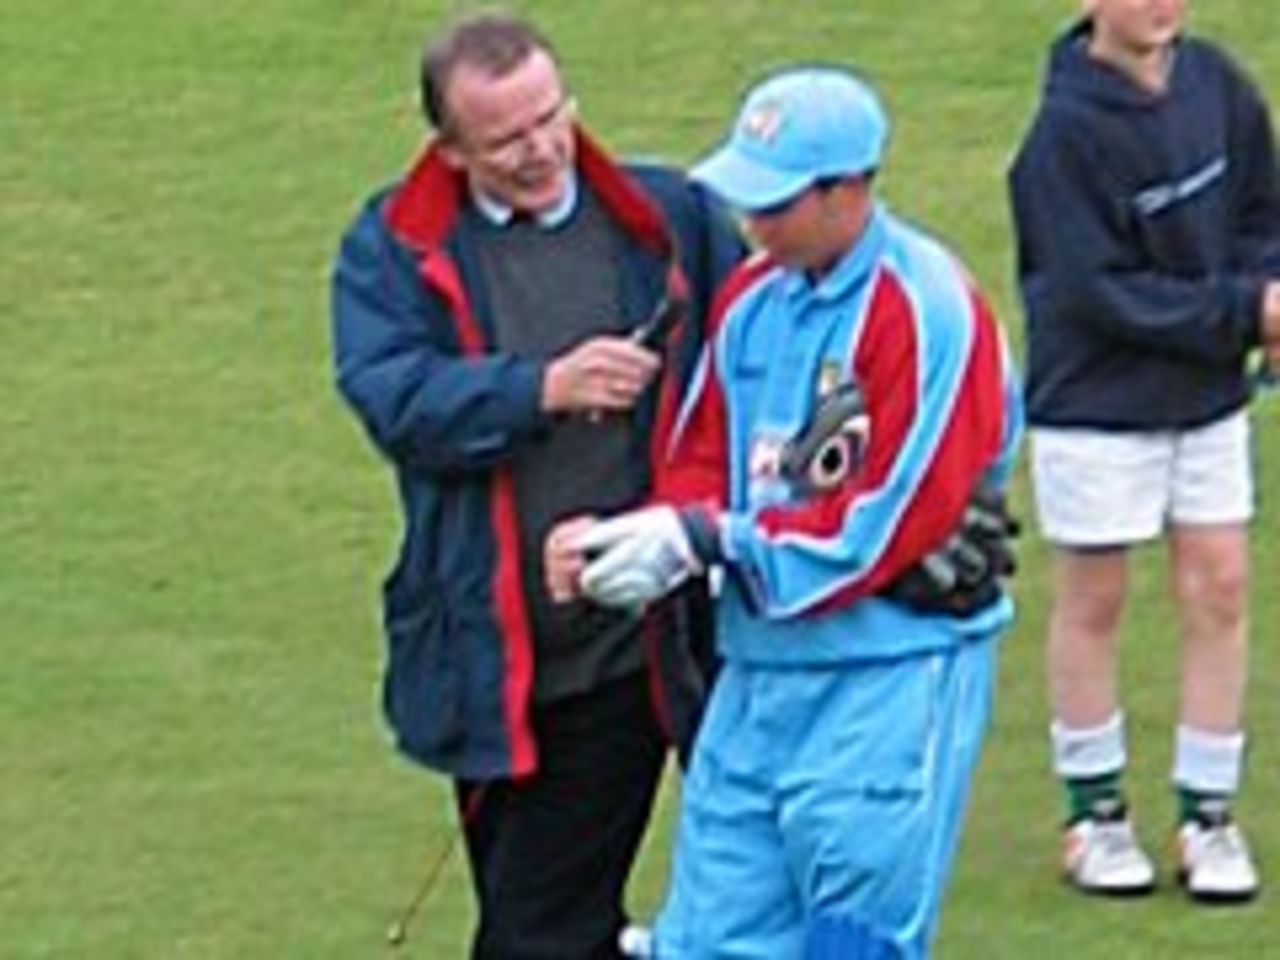 Kent wicket-keeper Geraint Jones is interviewed by Andrew Gidley as he leaves the field after taking 6 catches in the National League match v Leicestershire at Canterbury, a Kent record, 27 April 2003